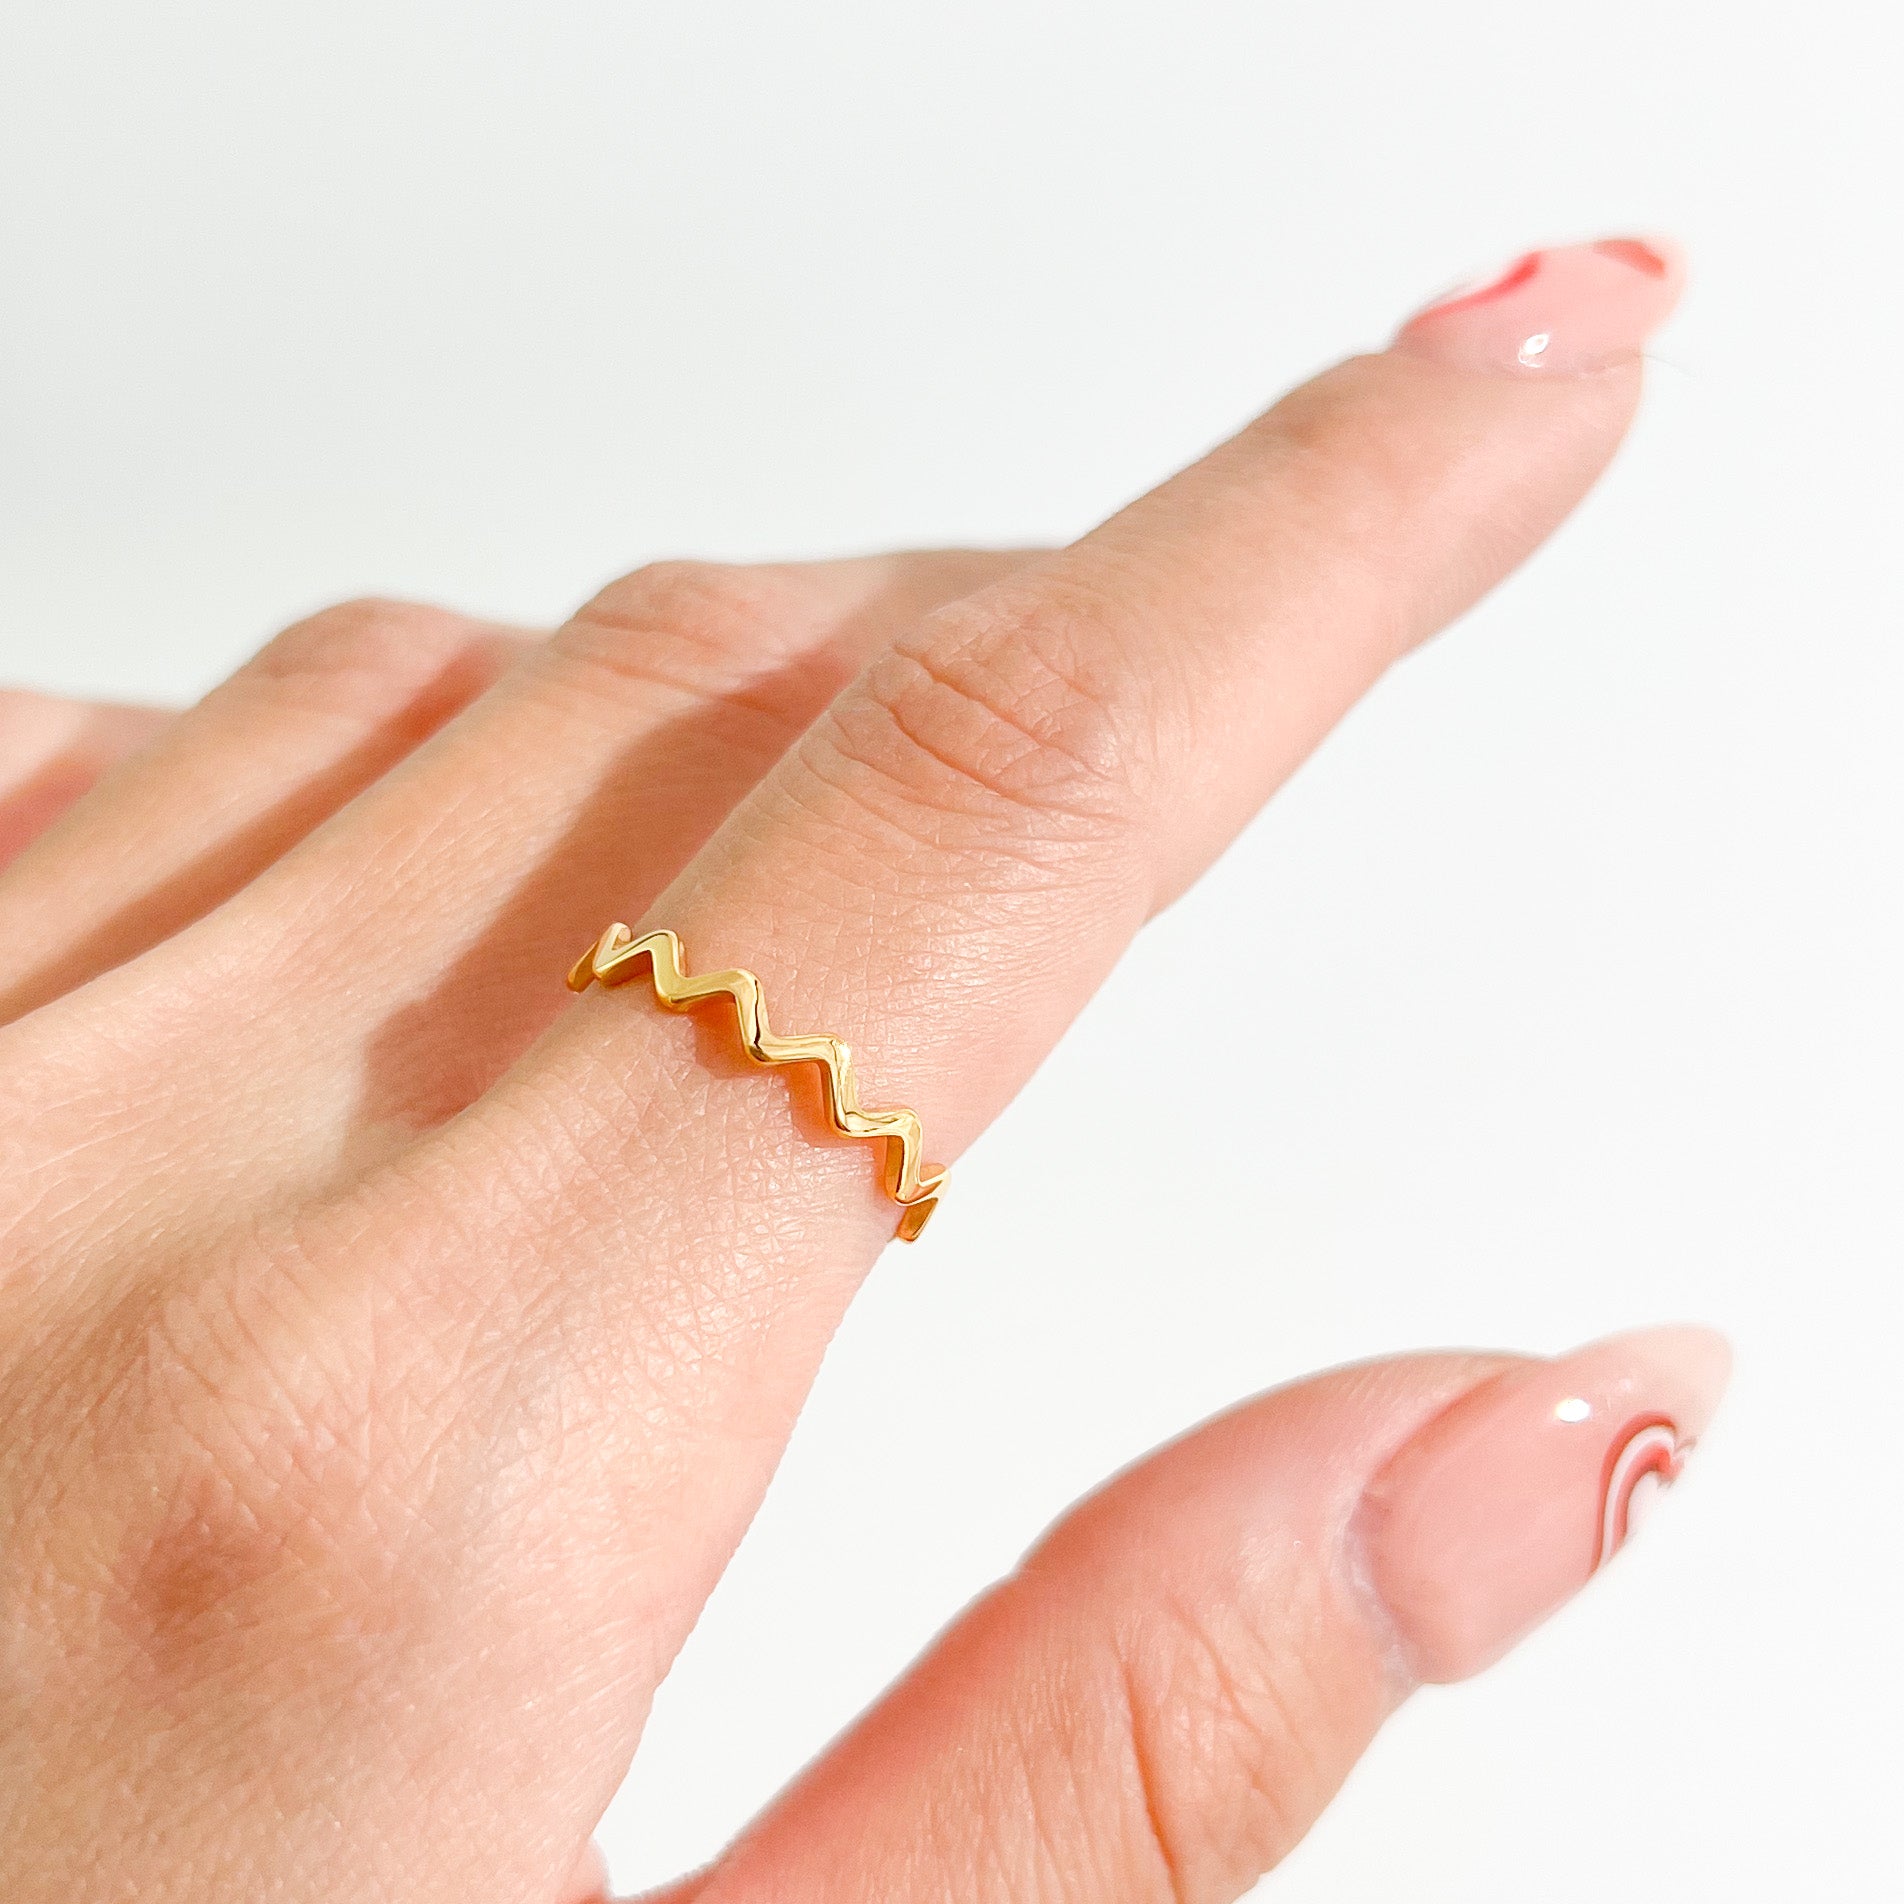 Making Waves Gold Ring - Flaire & Co.